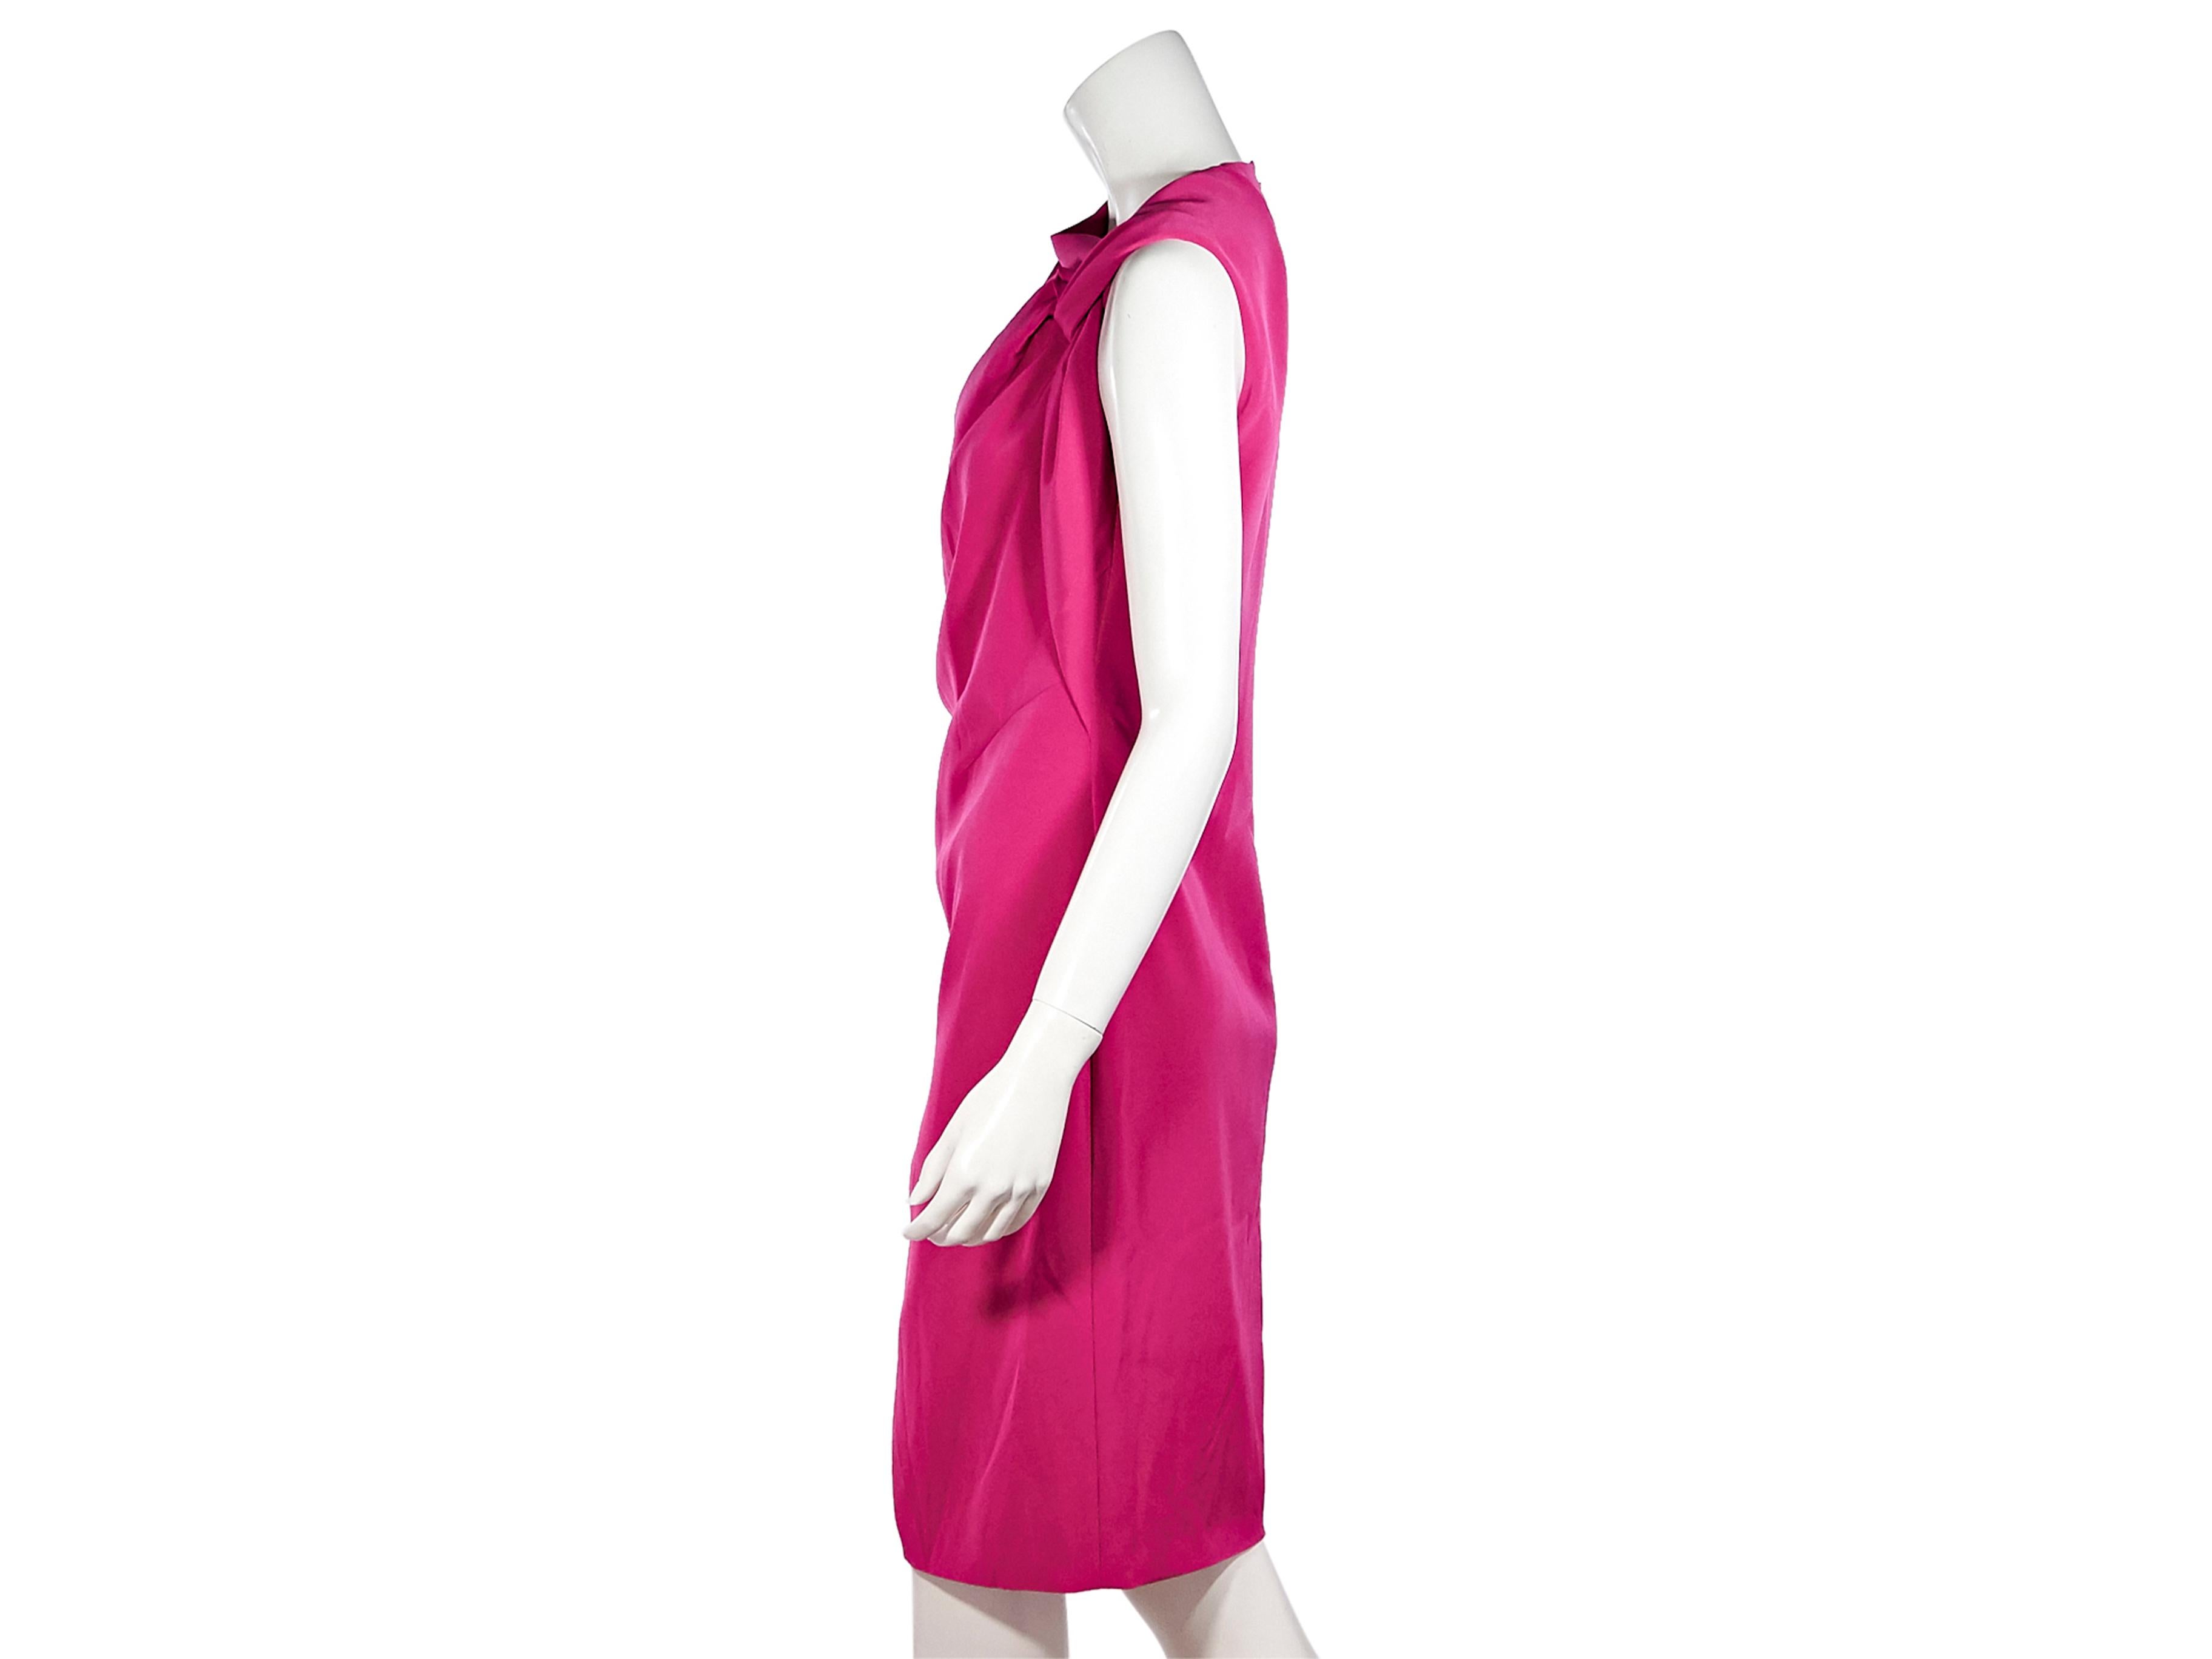 Product details:  Fuchsia taffeta knee-length dress by Lanvin.  Asymmetrical collar.  Sleeveless.  Concealed zip-back closure.  Draped-detail at front and side.  Polish the look with black patent leather pumps. Label size EU 40. 33